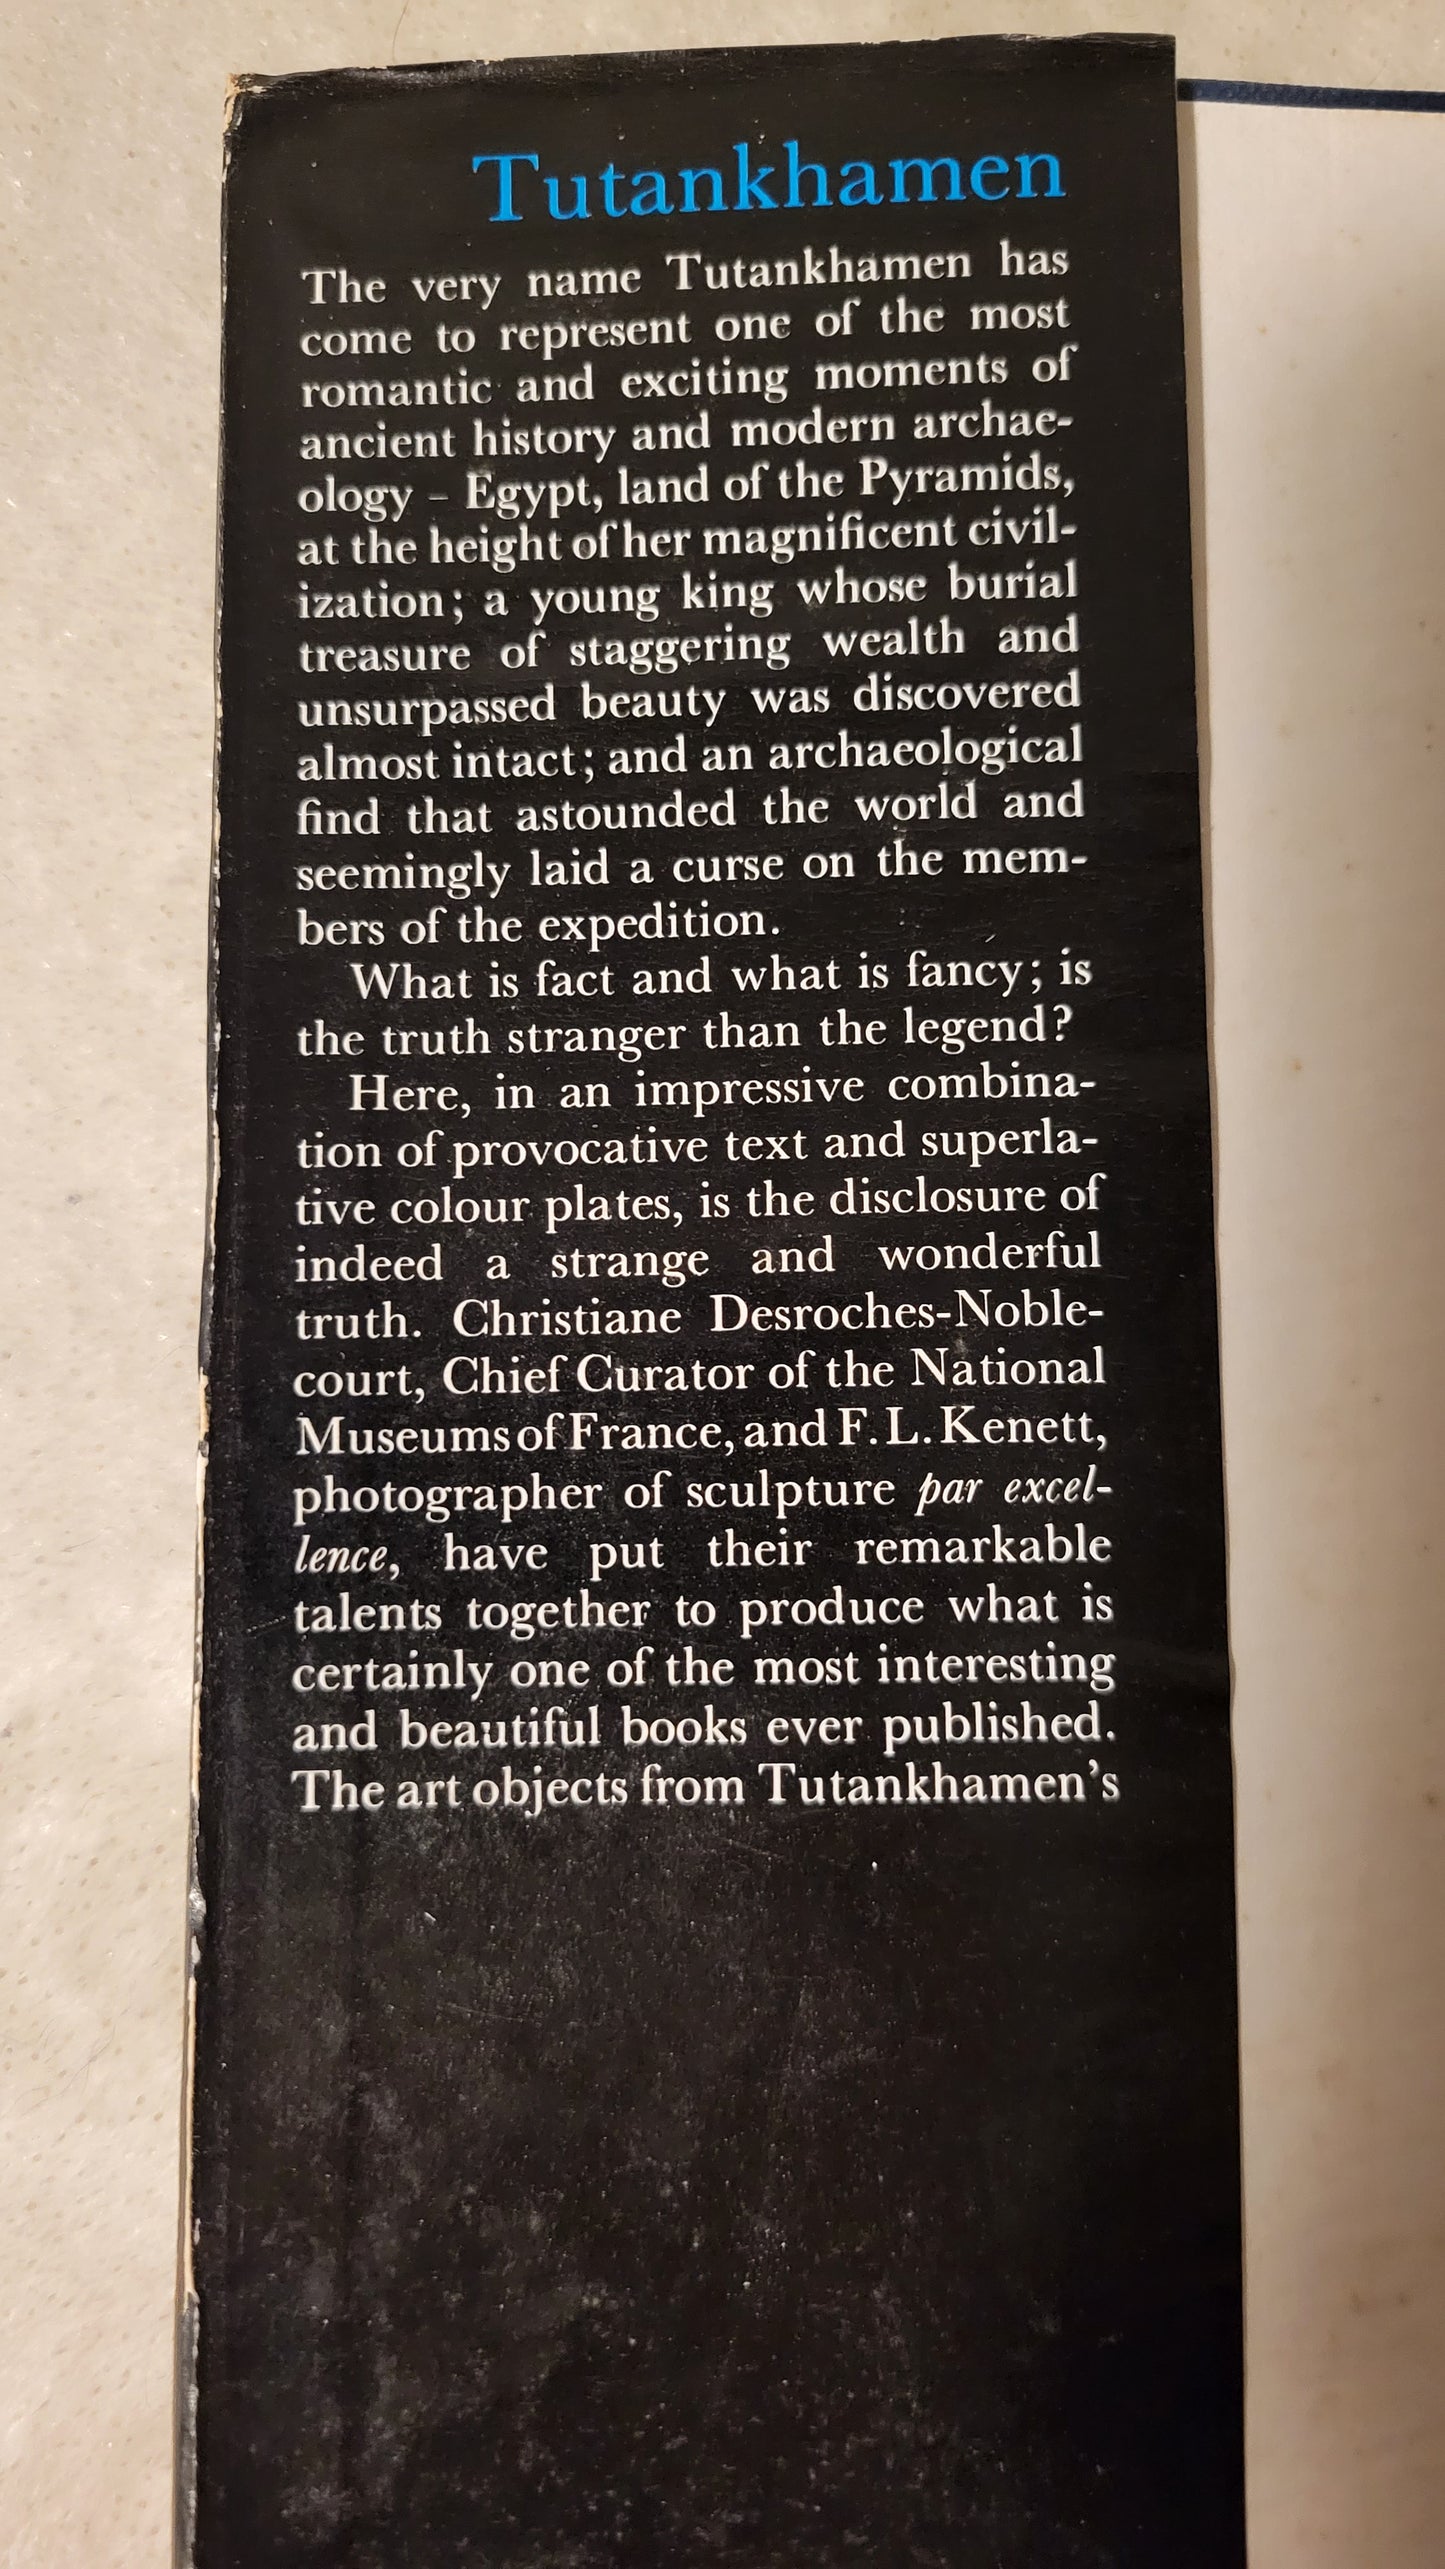 Used book for sale "Tutankhamen: Life and Death of a Pharaoh" by Christiane Deroches-Noblecourt, 1967 World Books edition. Jacket panel